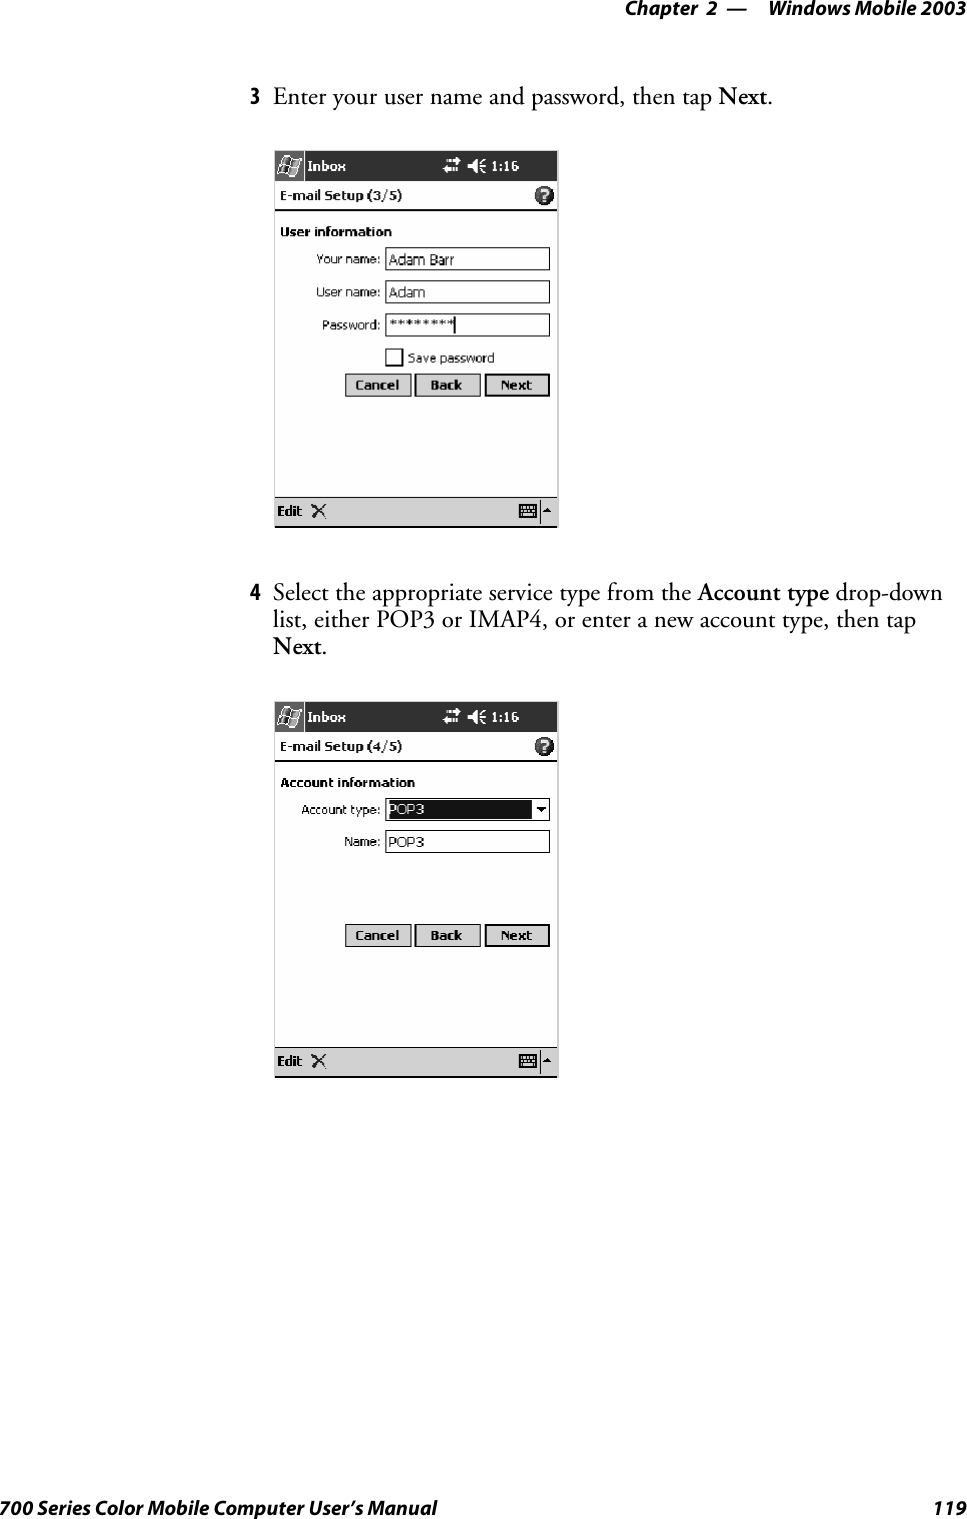 Windows Mobile 2003—Chapter 2119700 Series Color Mobile Computer User’s Manual3Enteryourusernameandpassword,thentapNext.4Select the appropriate service type from the Account type drop-downlist, either POP3 or IMAP4, or enter a new account type, then tapNext.